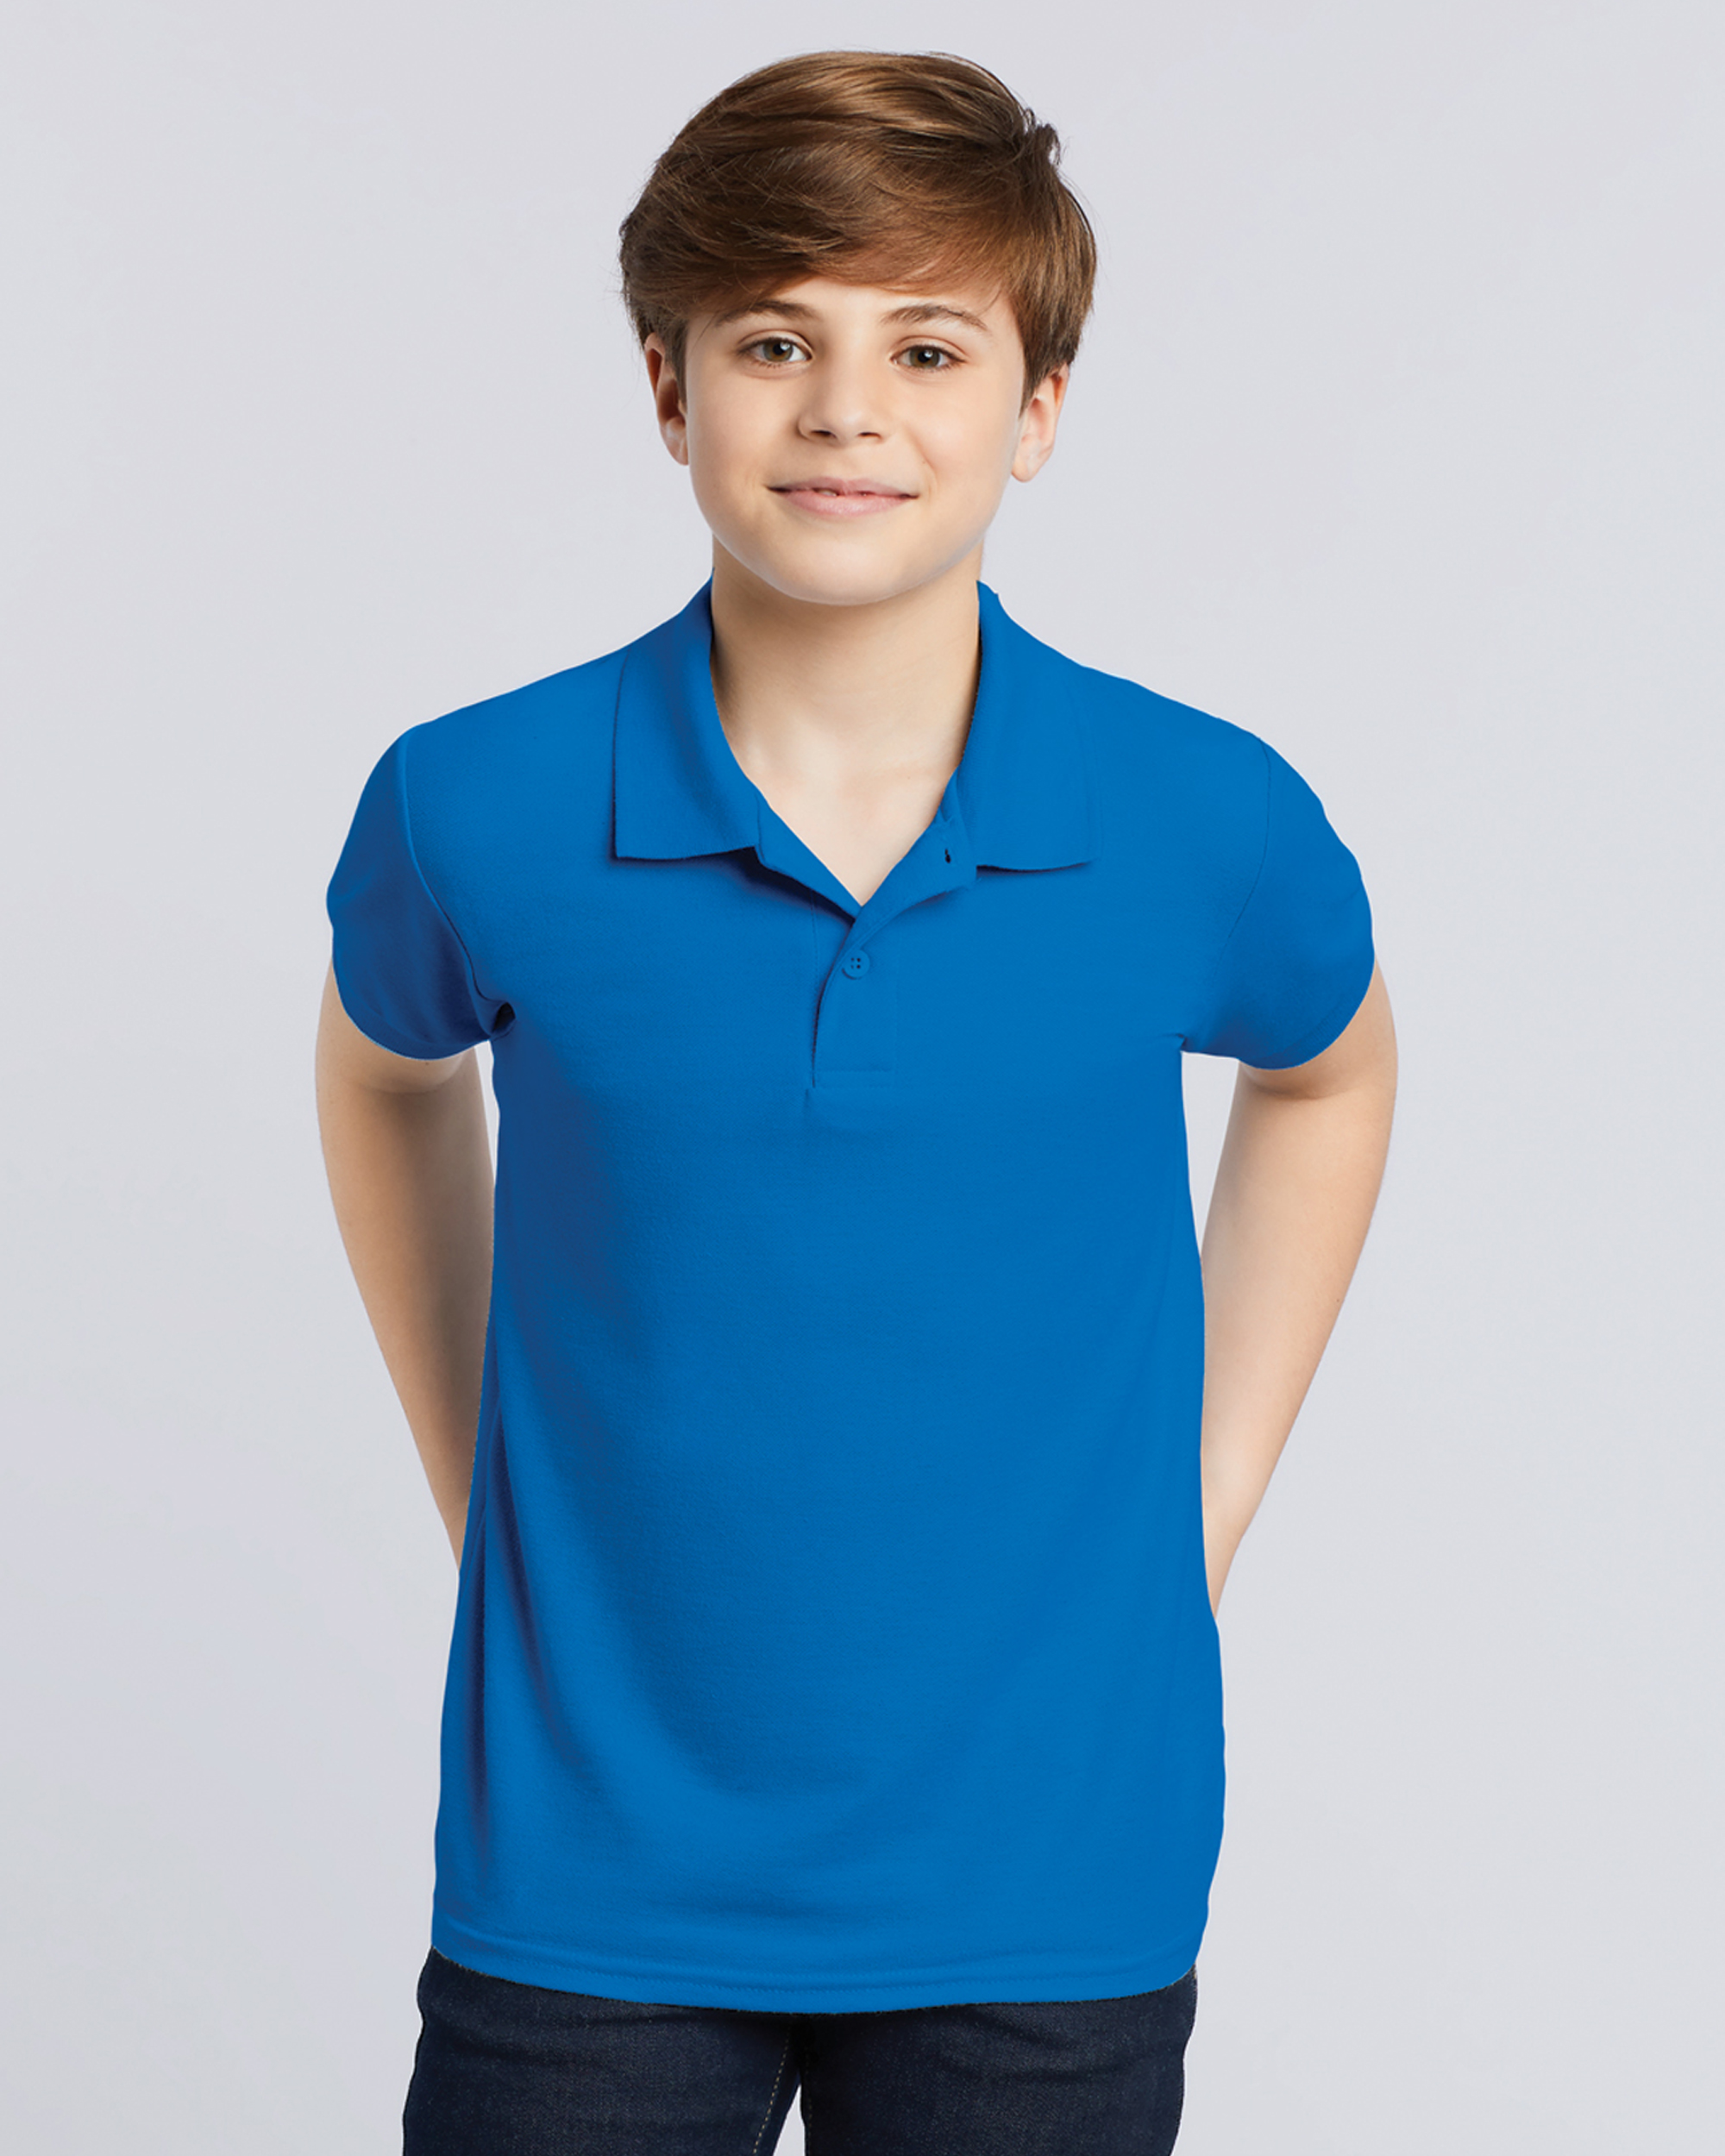 GD143 - DryBlend® Youth Double Pique Sport Shirt - One Stop